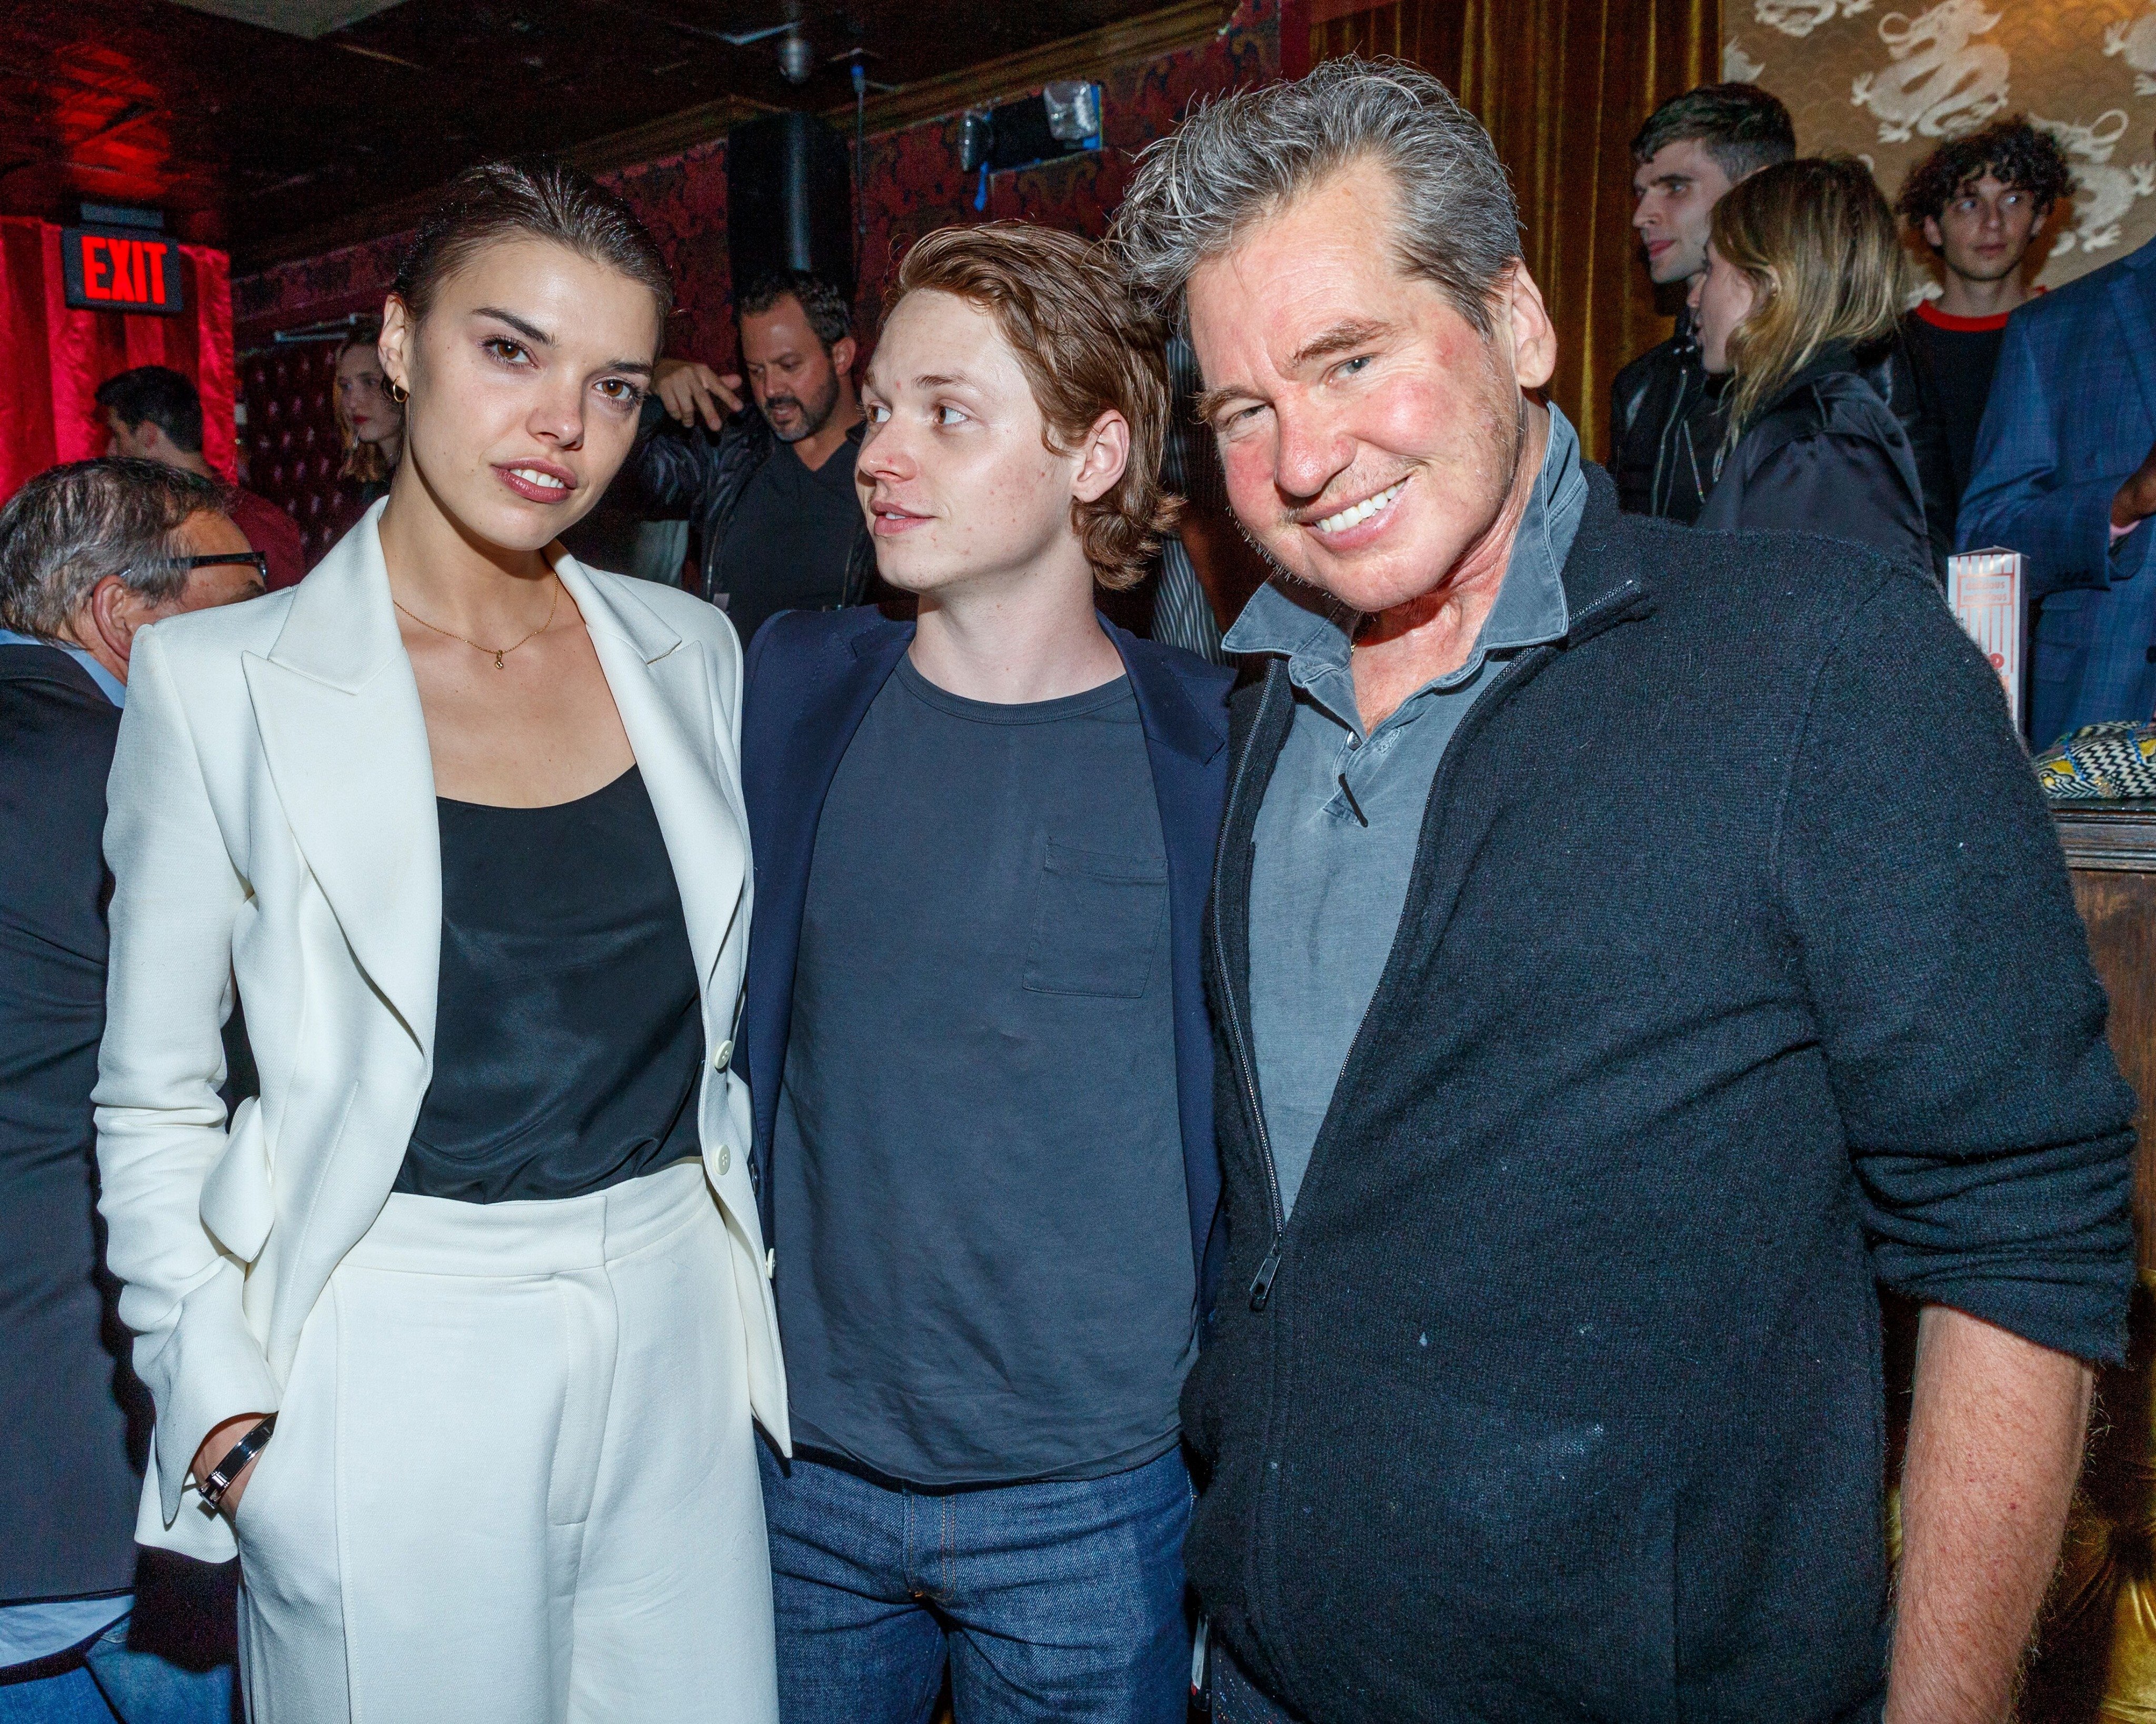 Director Eva Dolezalová and actors Jack Kilmer and Val Kilmer attend an event where Flaunt Presents a private screening of Eva Dolezalova's "Carte Blanche" at Hollywood Roosevelt Hotel. | Source: Getty Images